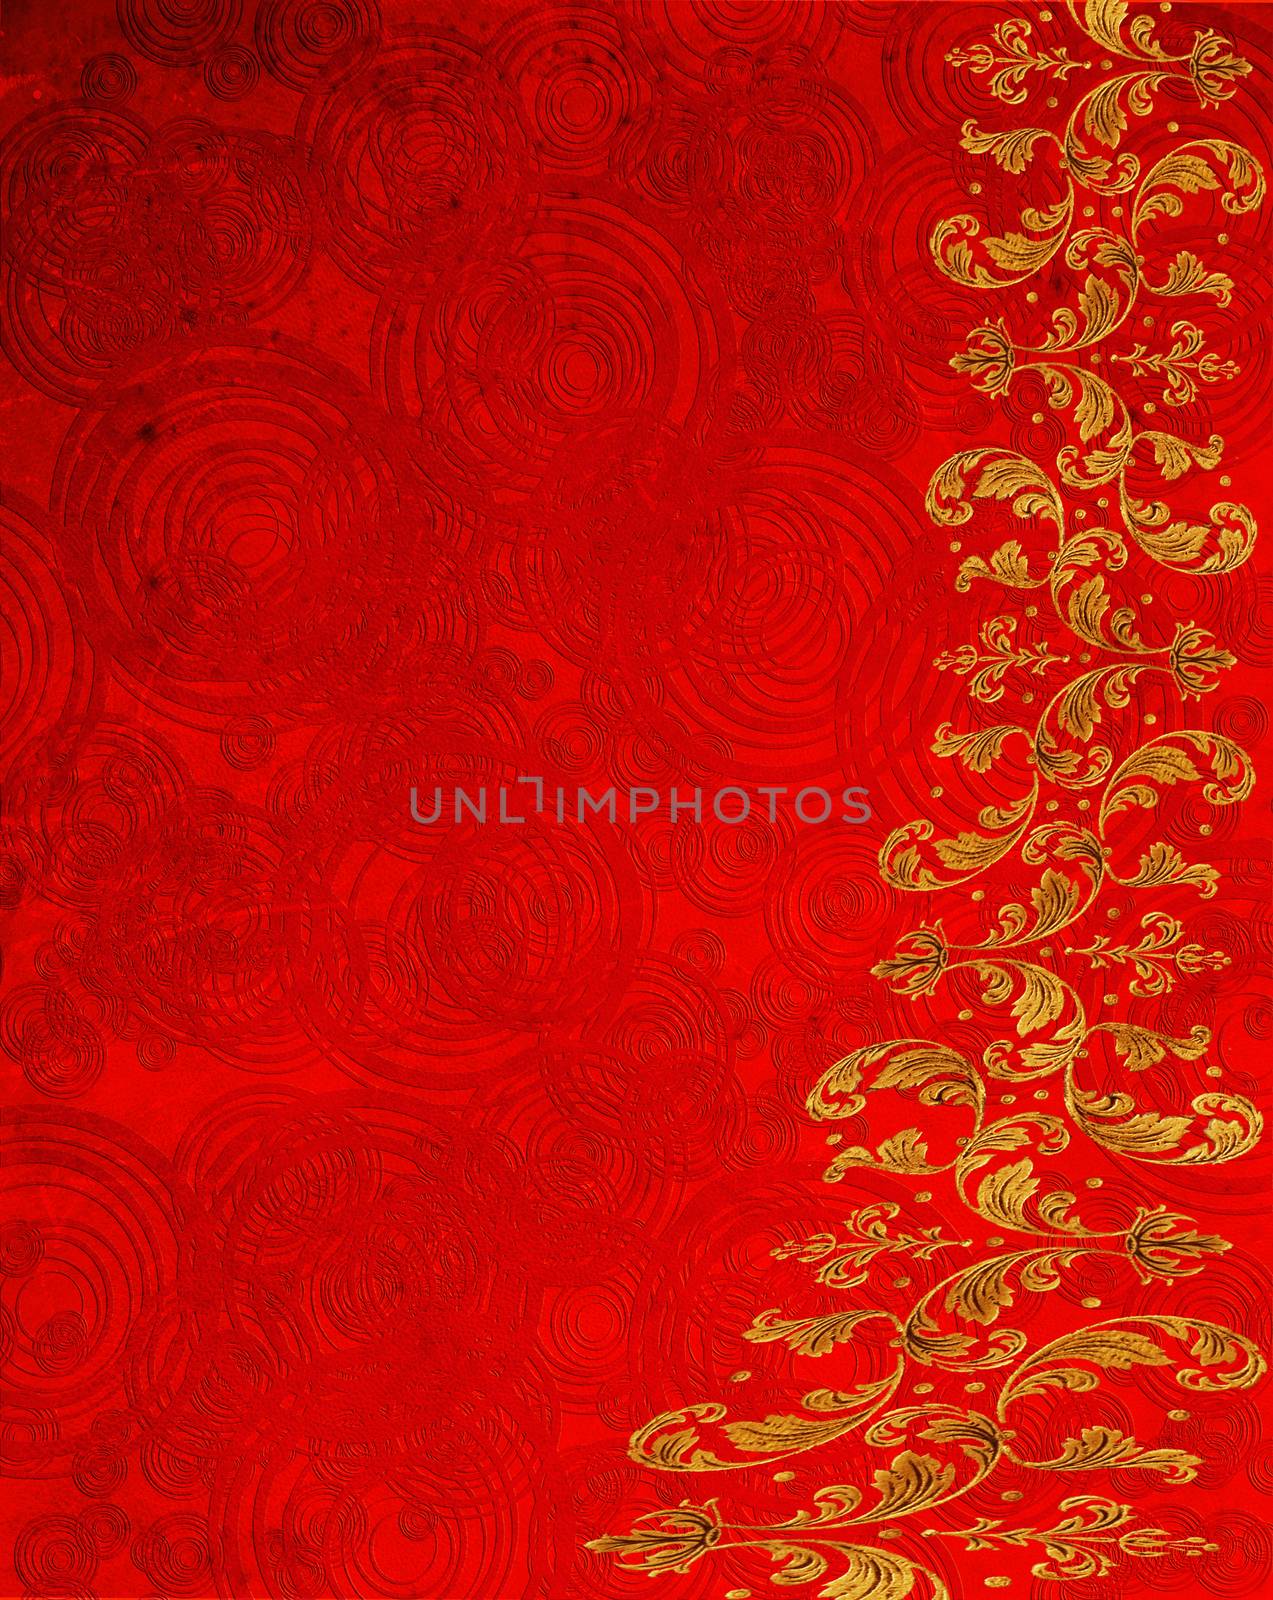 red abstract background with circles and golden floral decoration